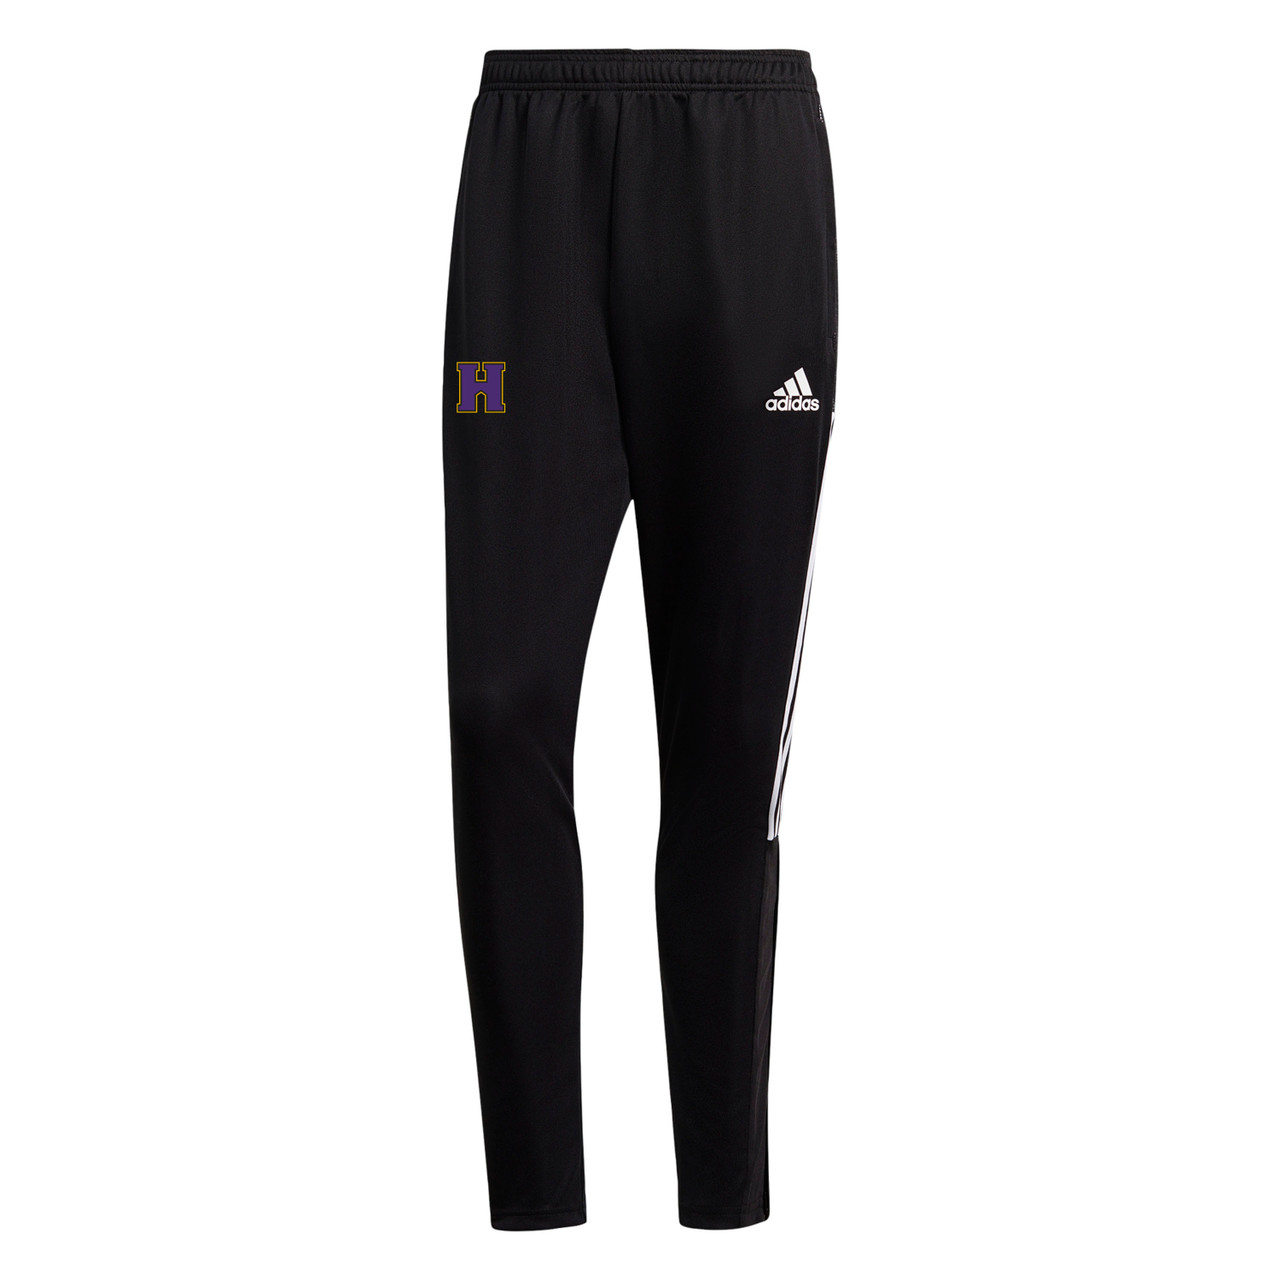 Houghton Track Pants - The Highlanders Shop